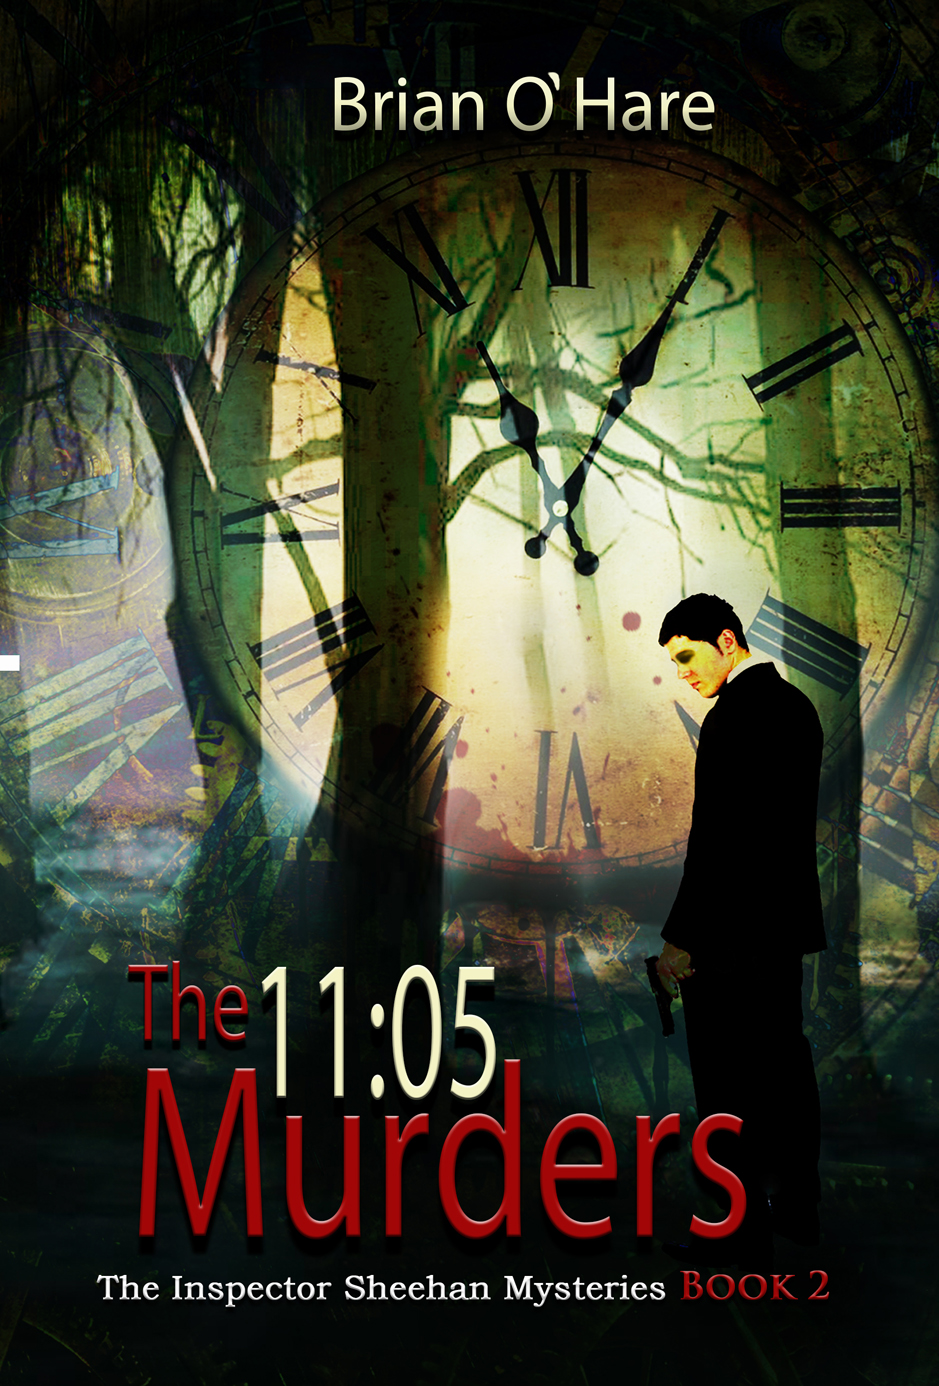 Large,  clock-face. Dark wood scene, with a searching man carrying a revolver, superimposed on clock Title in white and red print: The 11:05 Murders.